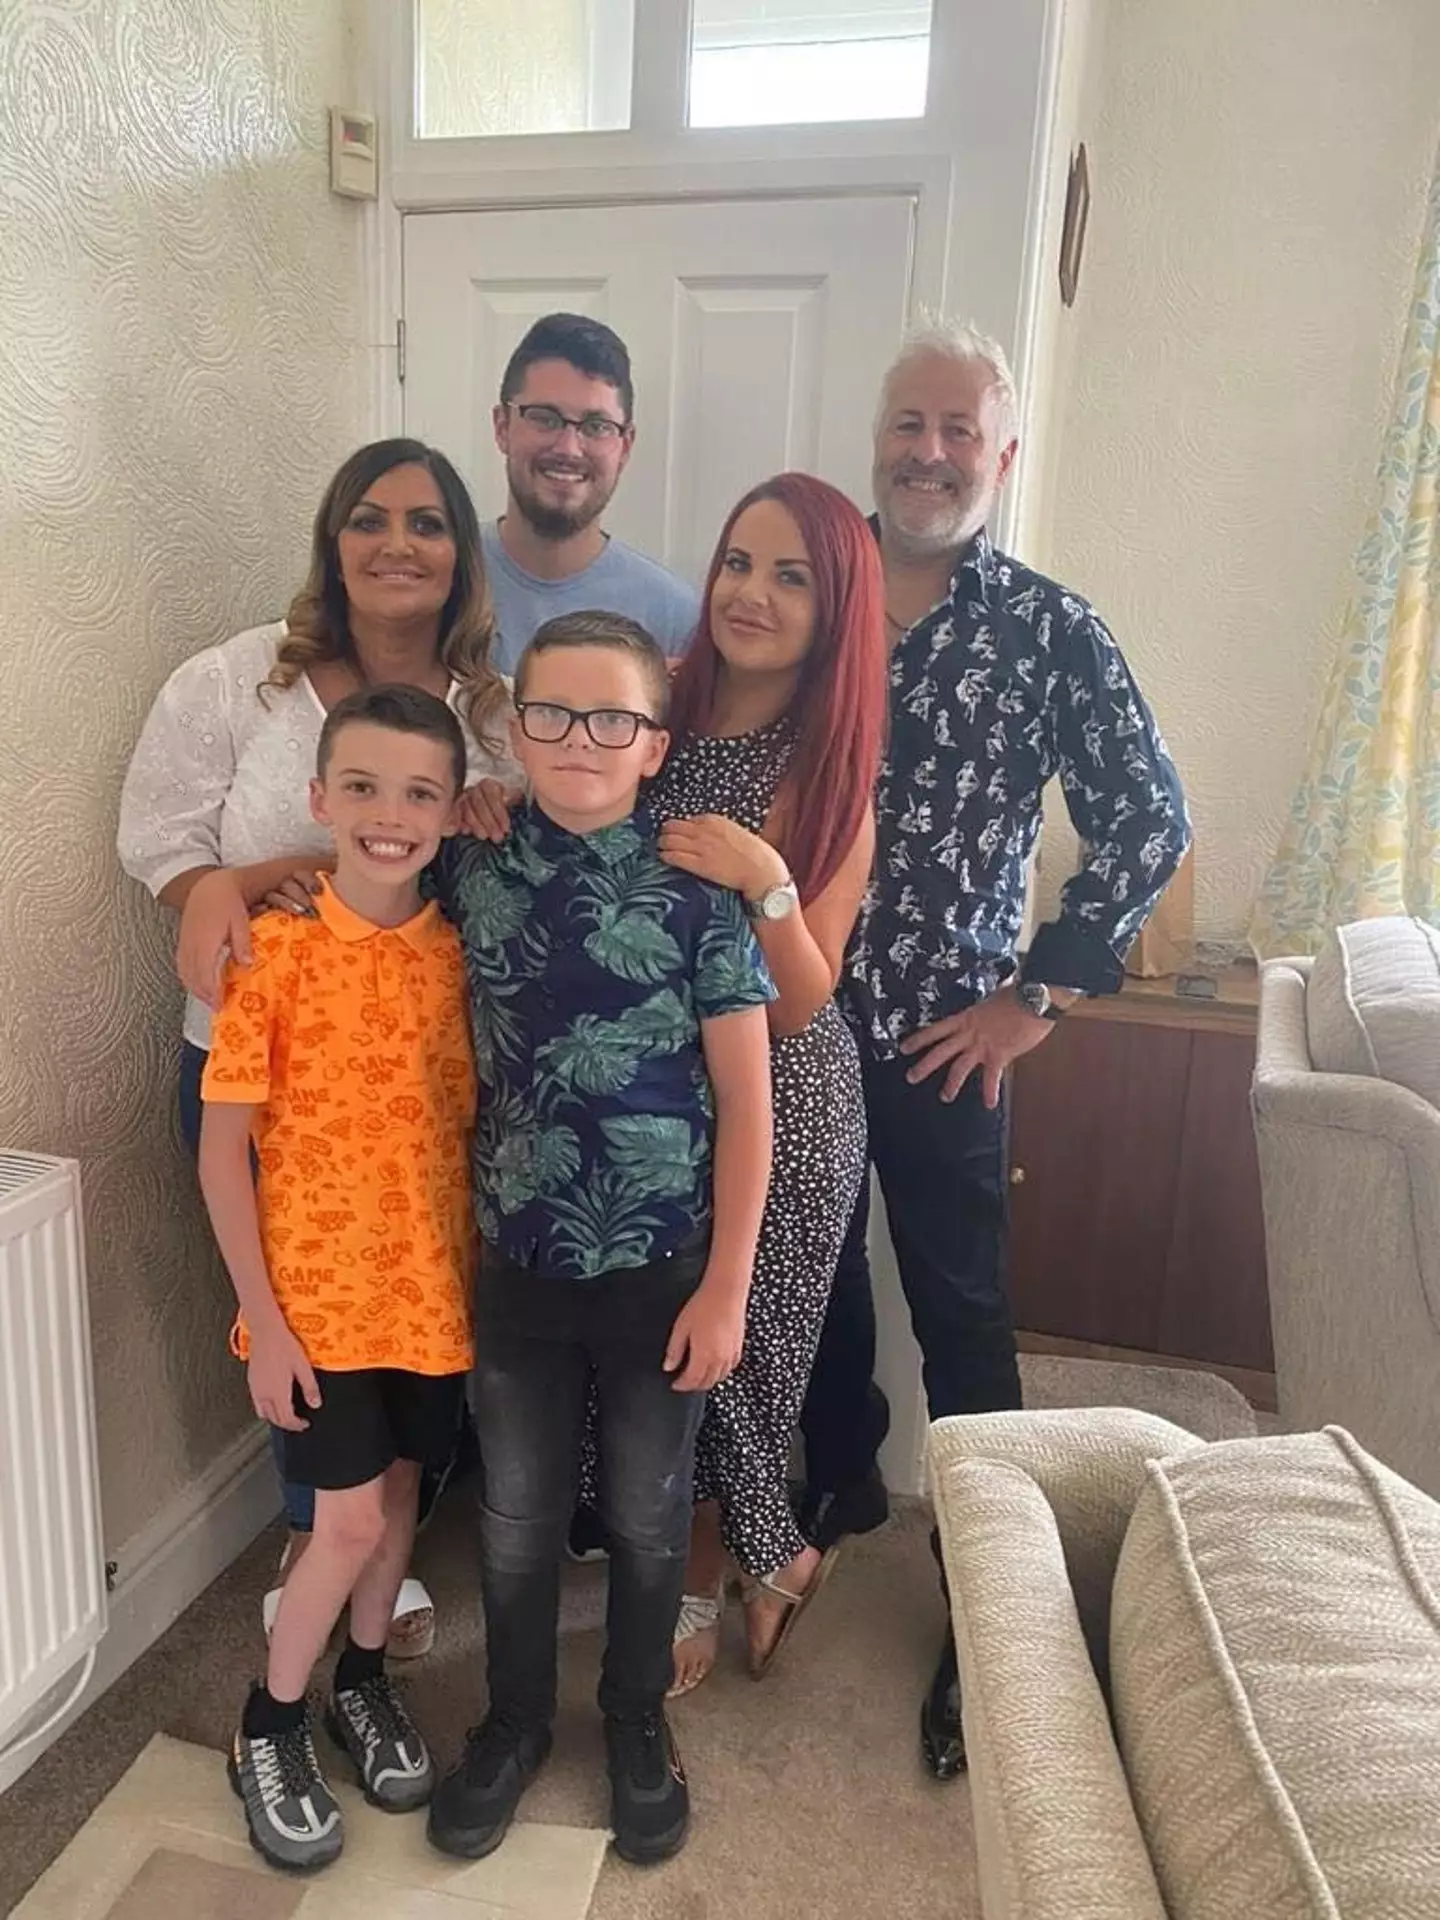 The family have now launched a GoFundMe.